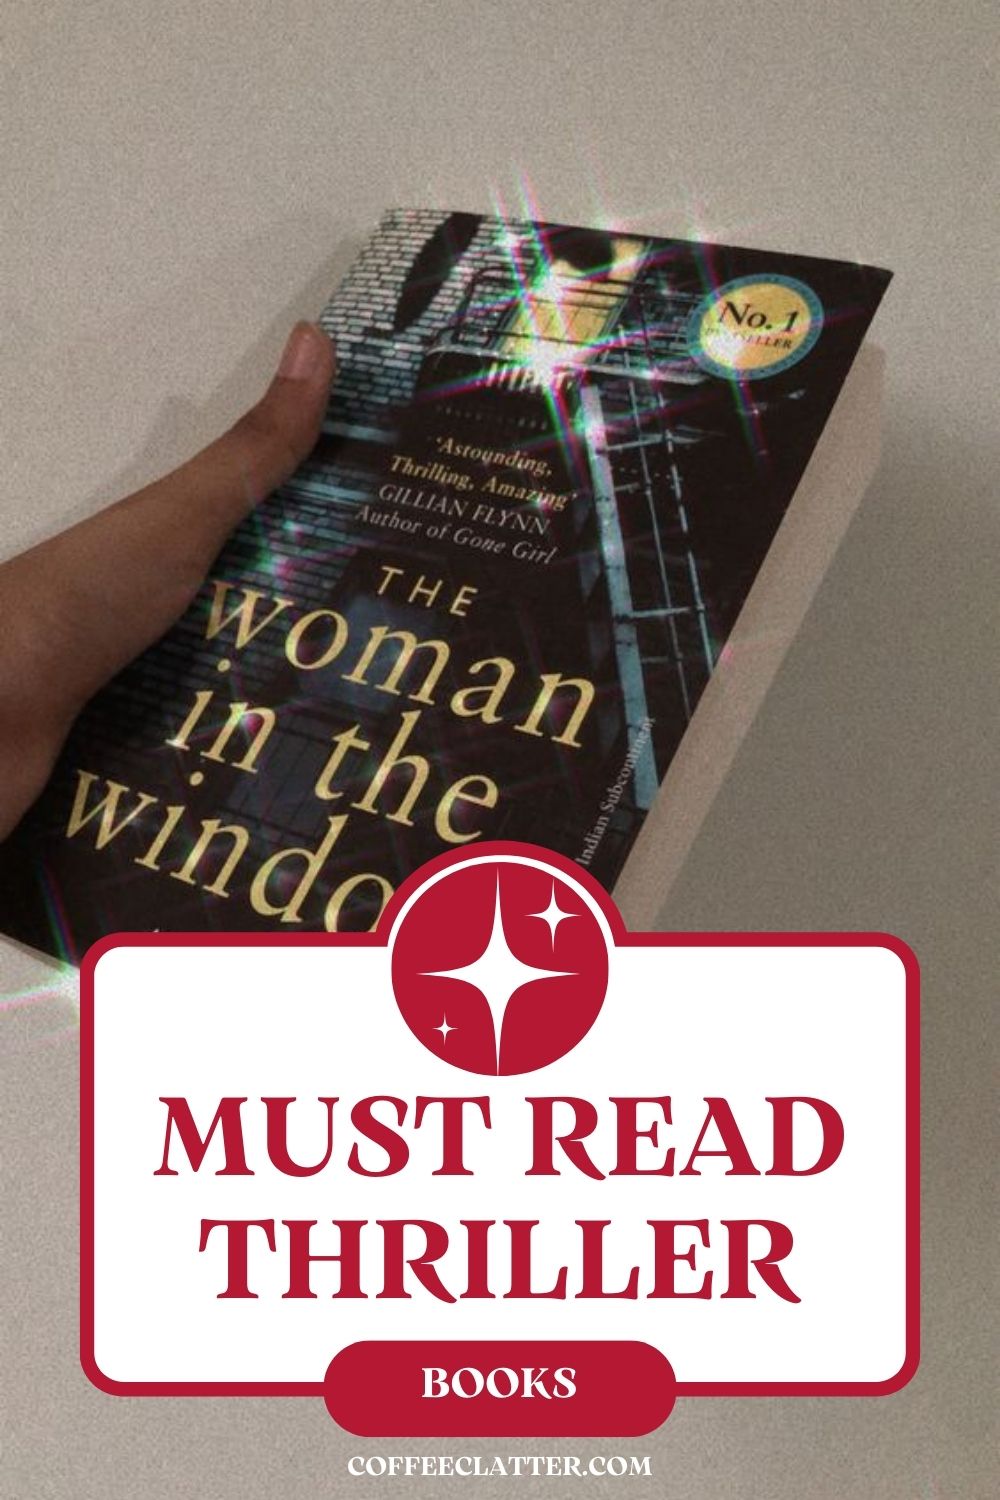 Book-summary-a-must-read-thriller-the-woman-in-the-window